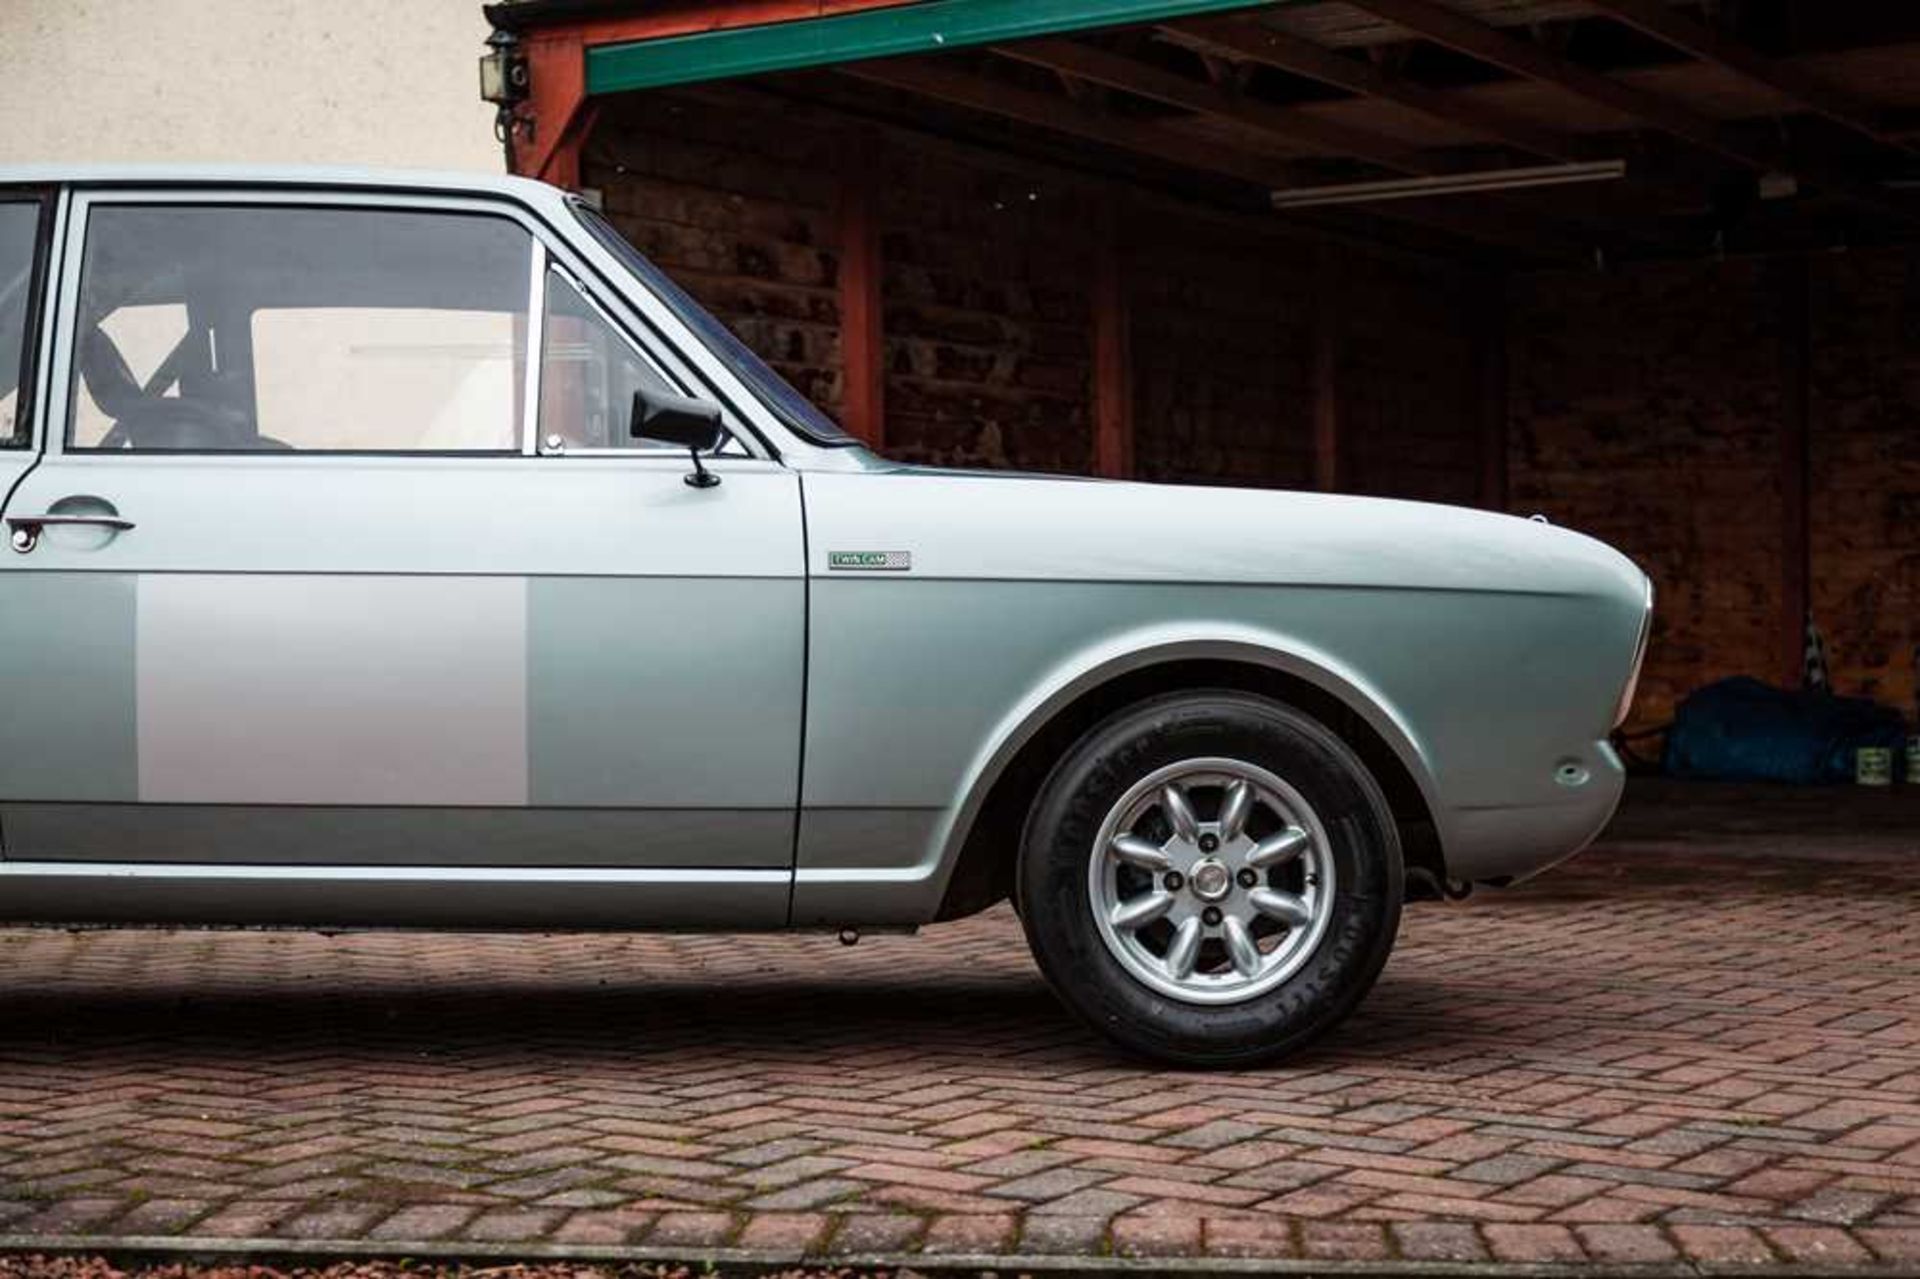 1969 Ford Cortina 'Lotus' Competition Saloon Powered by a 1598cc FIA-legal Lotus Twin-Cam with Twin - Image 29 of 55